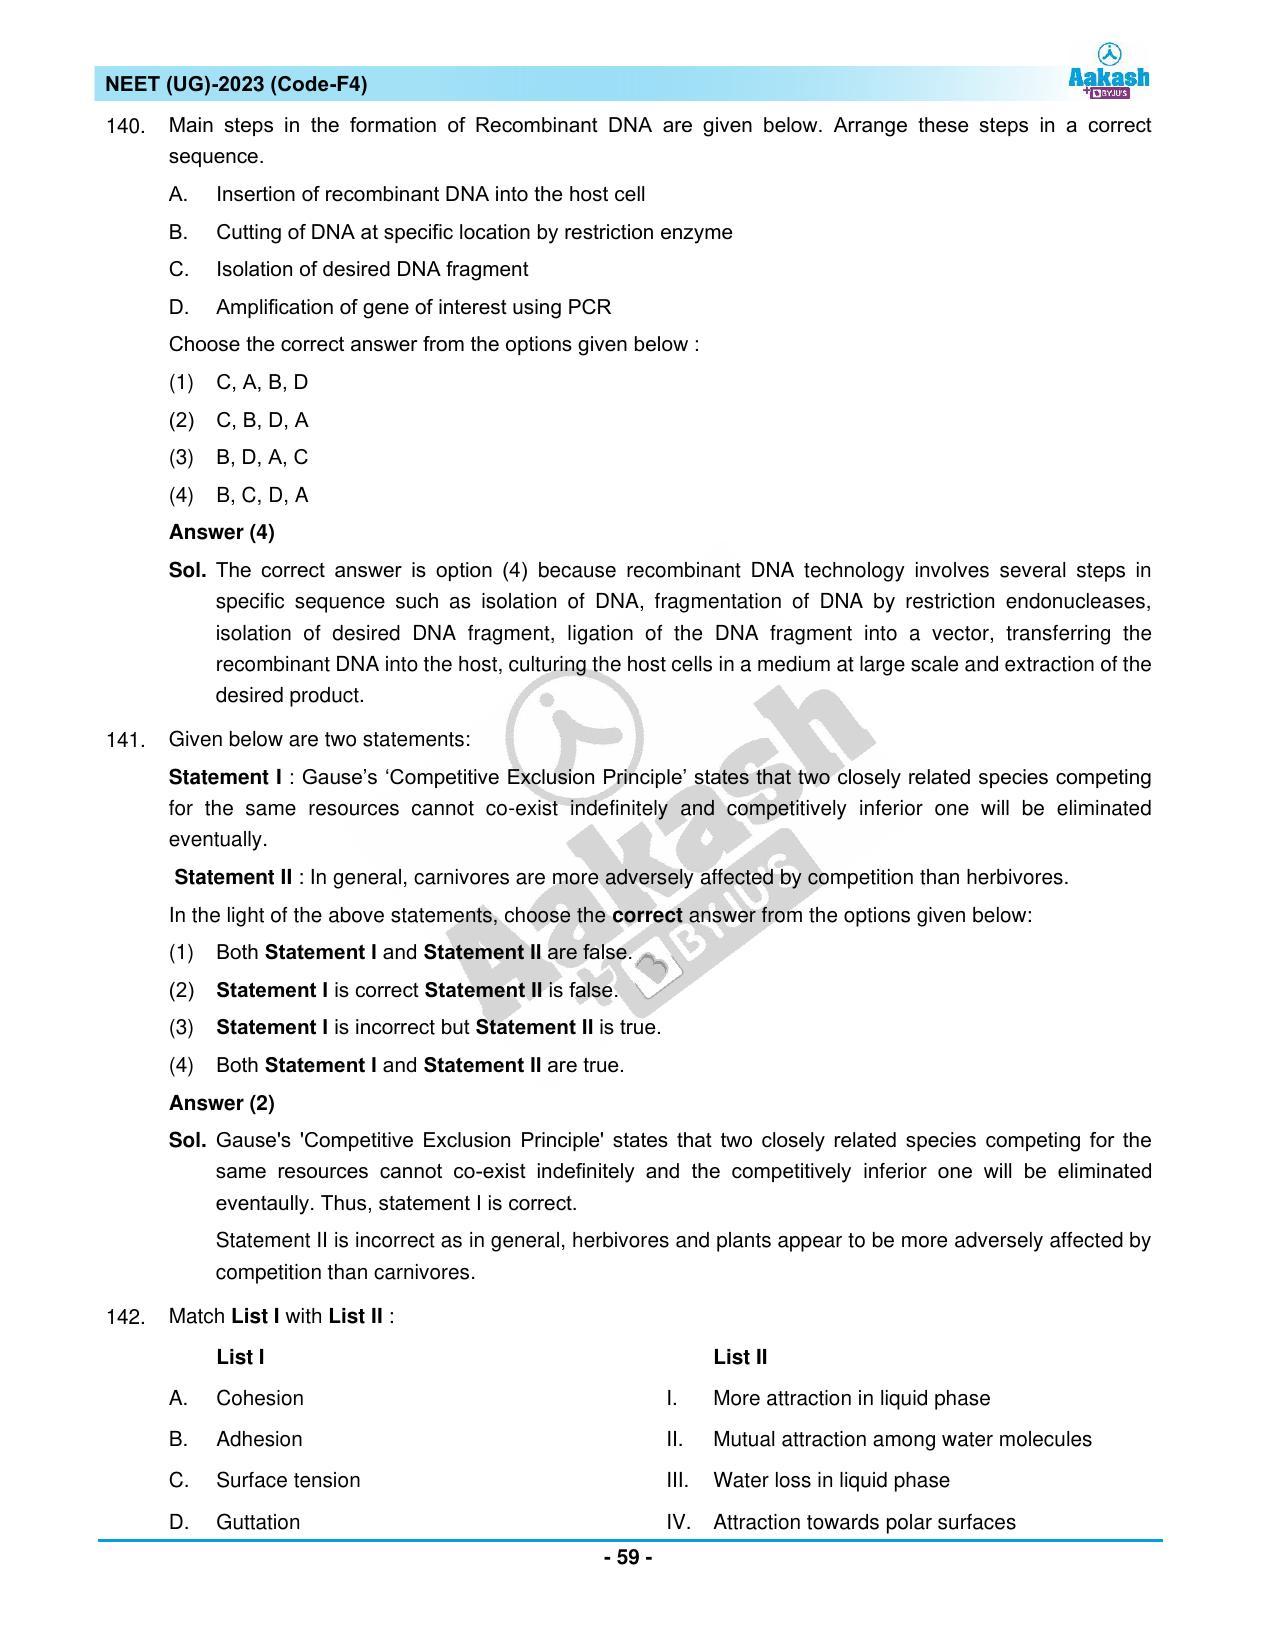 NEET 2023 Question Paper F4 - Page 59